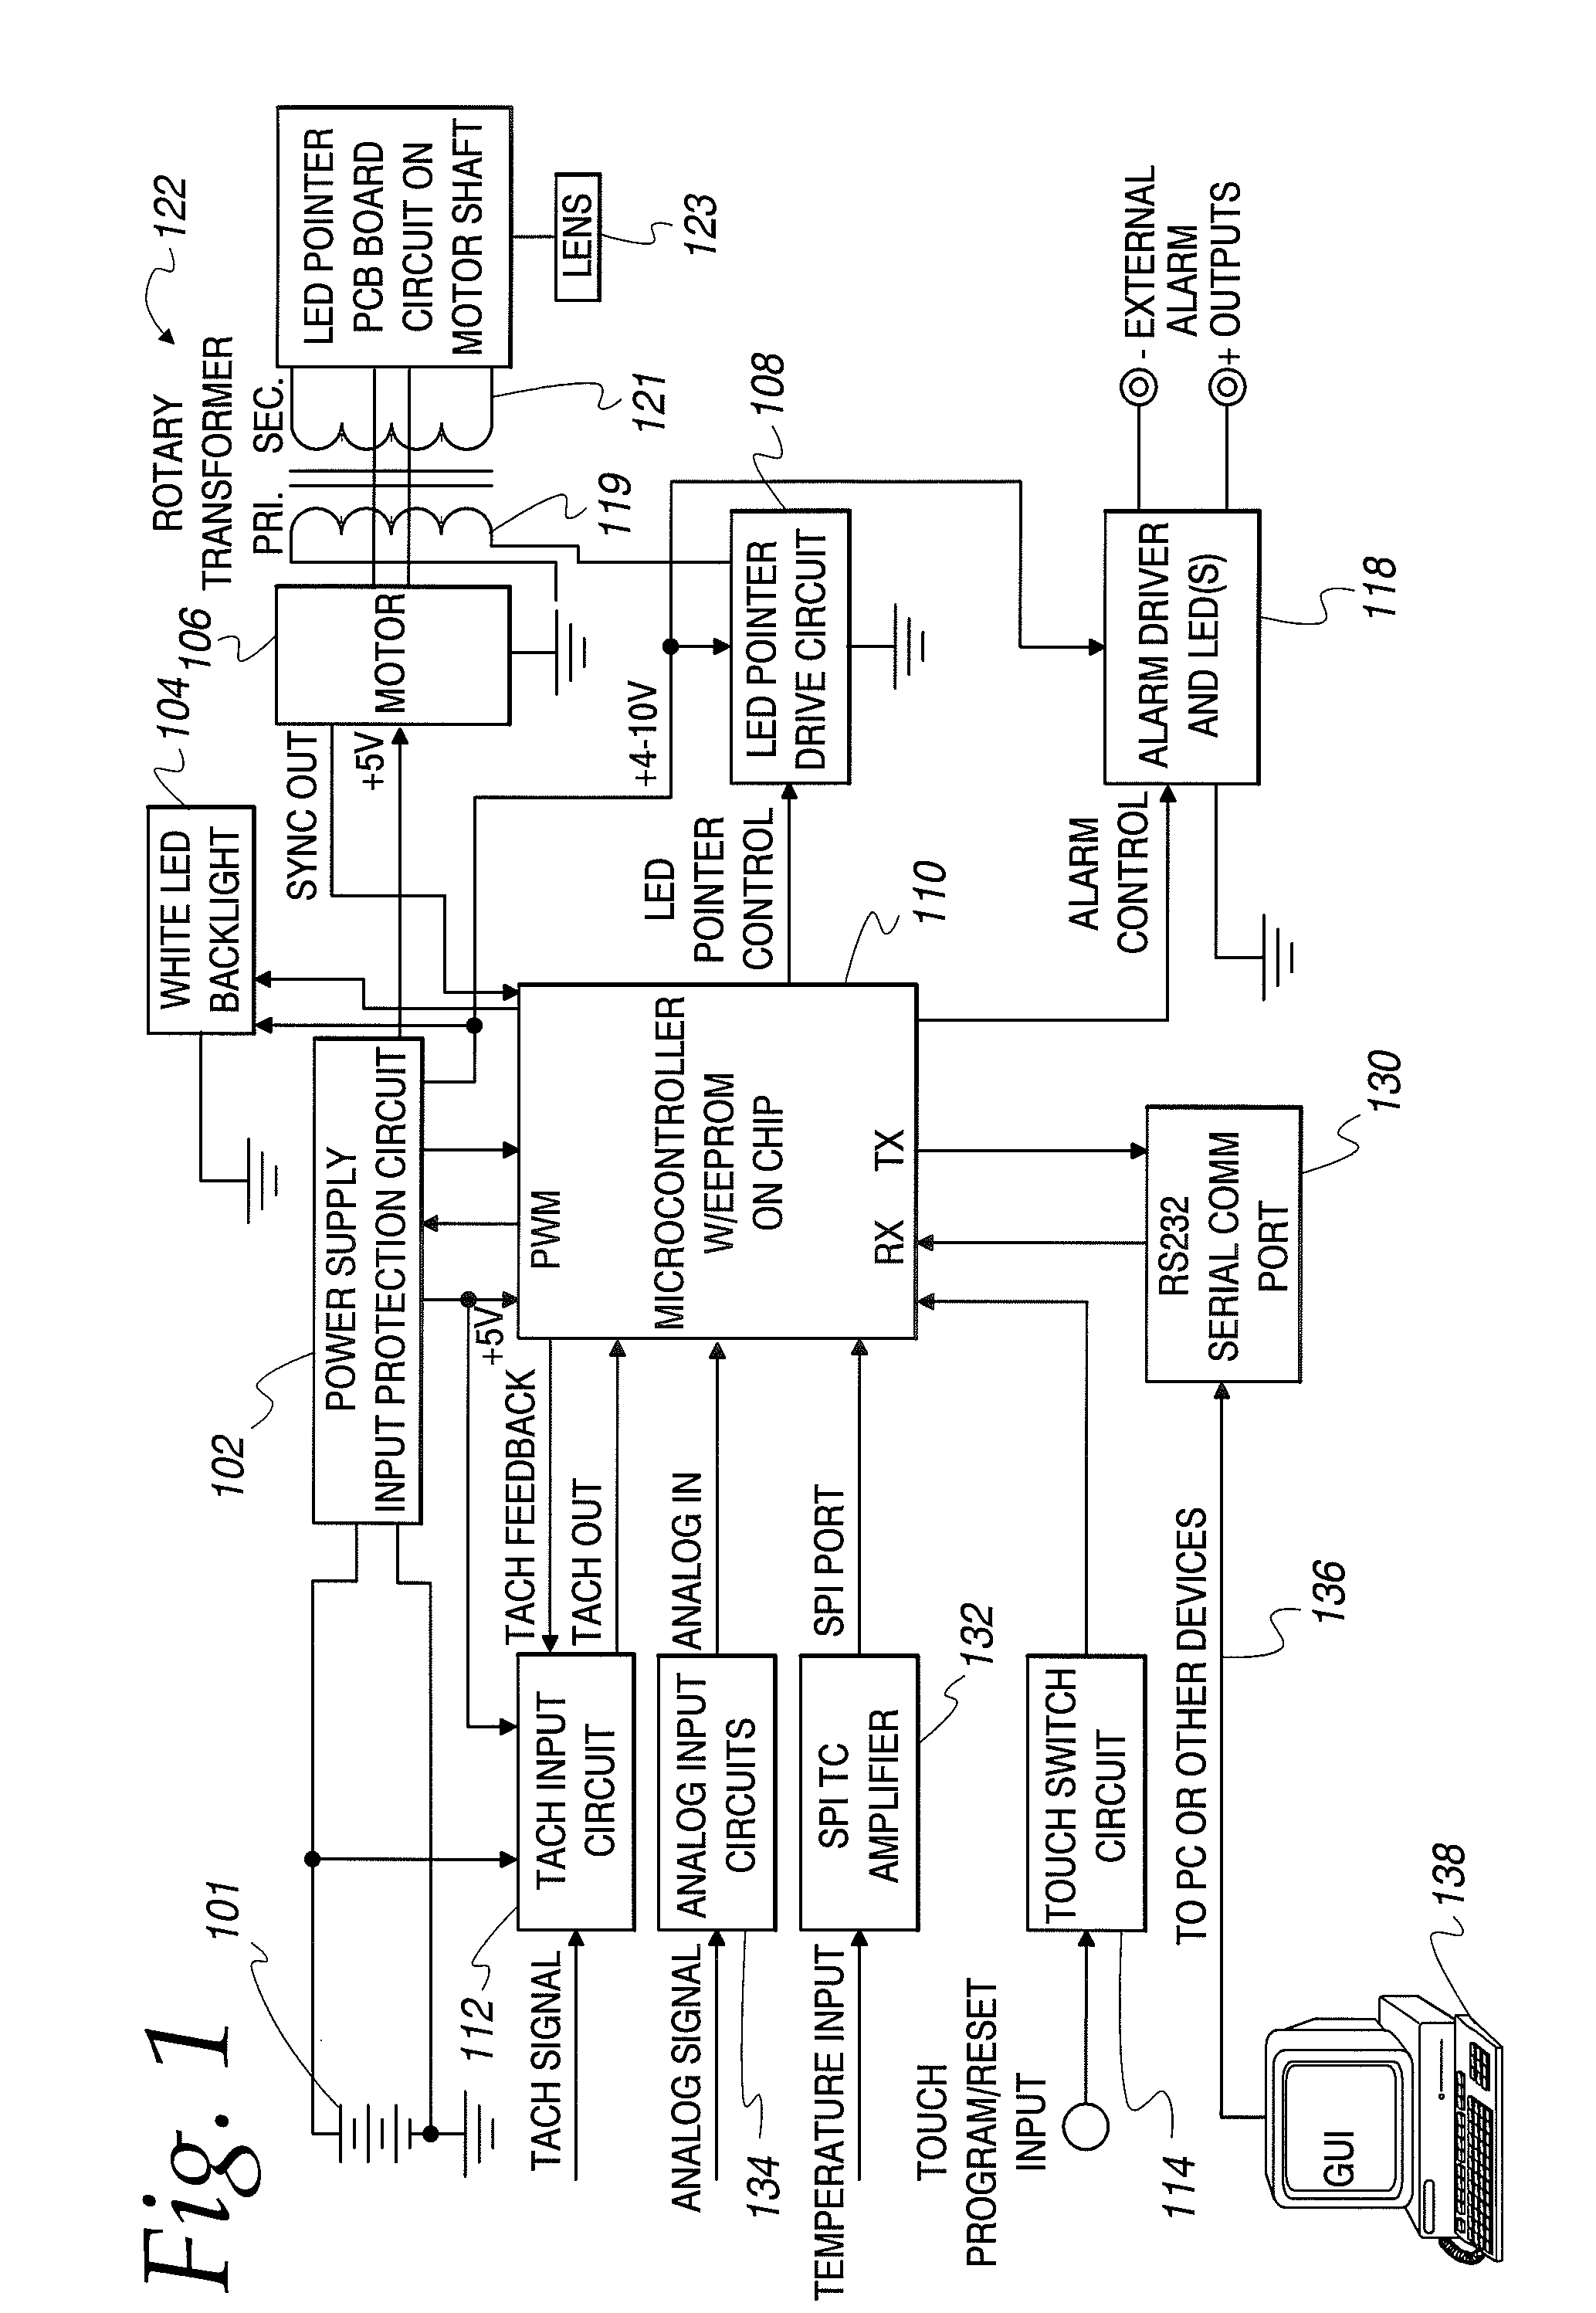 System and method for providing a vehicle display